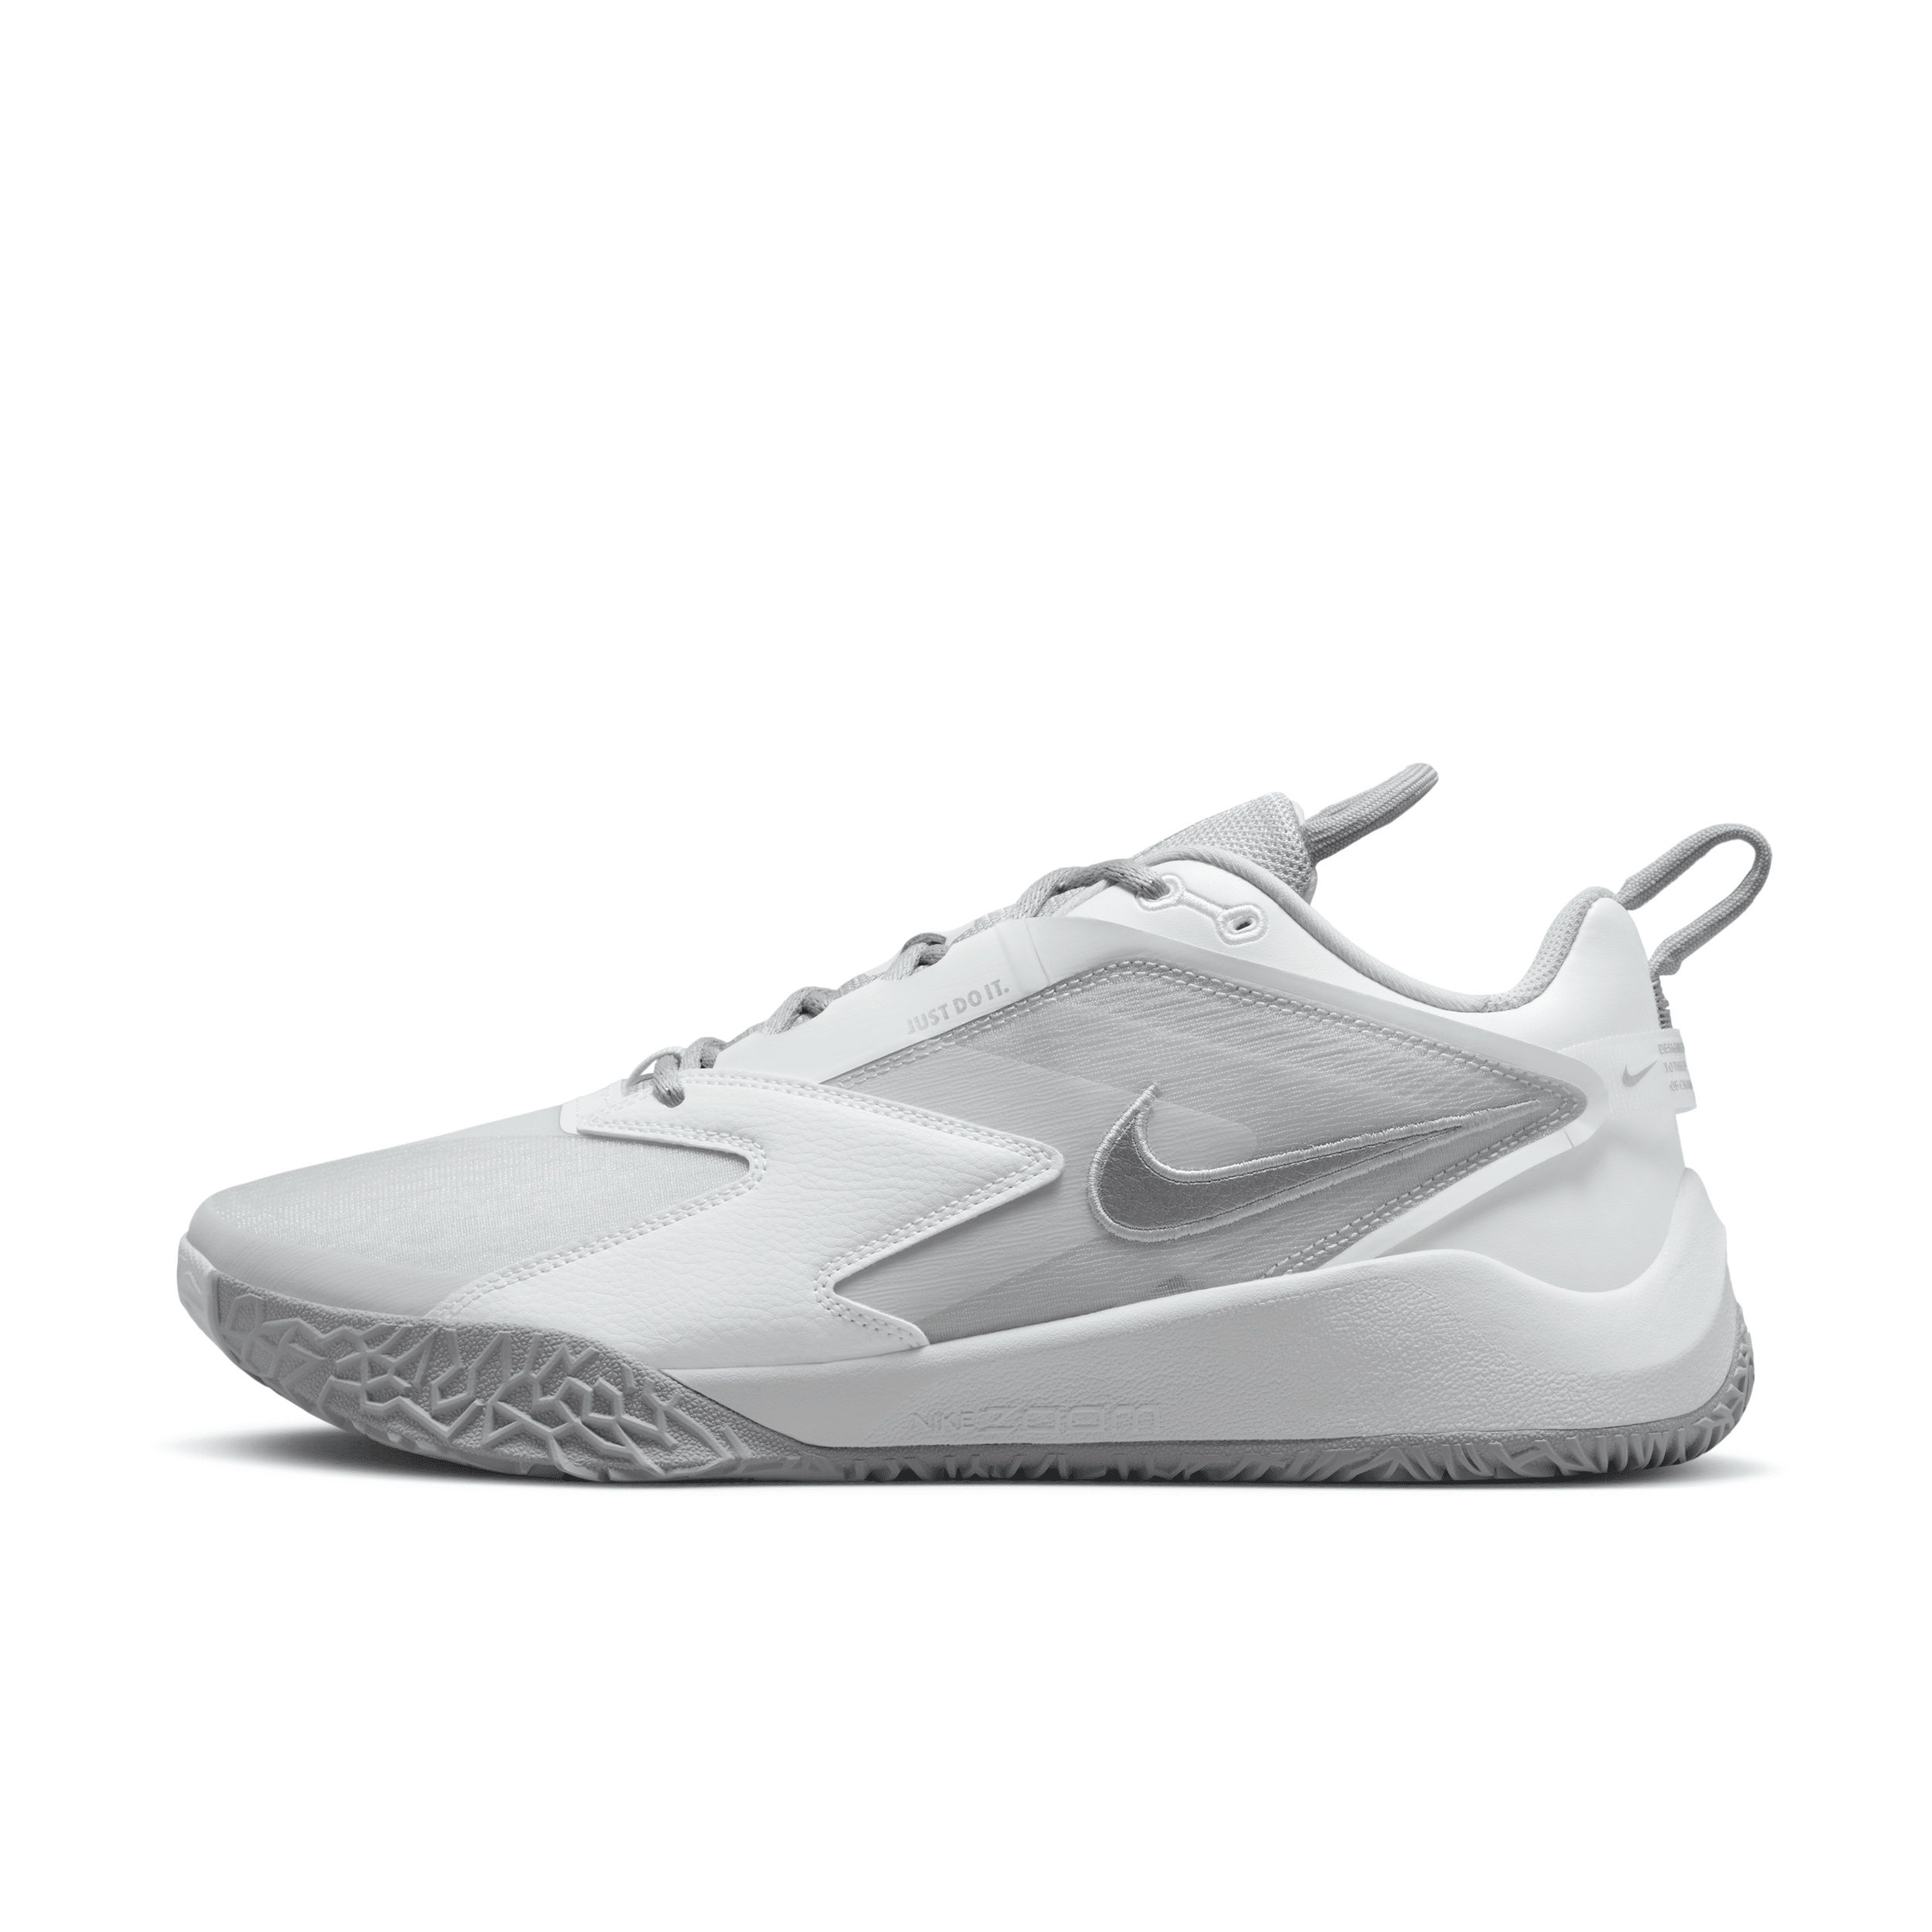 Nike Unisex HyperAce 3 Volleyball Shoes - 1